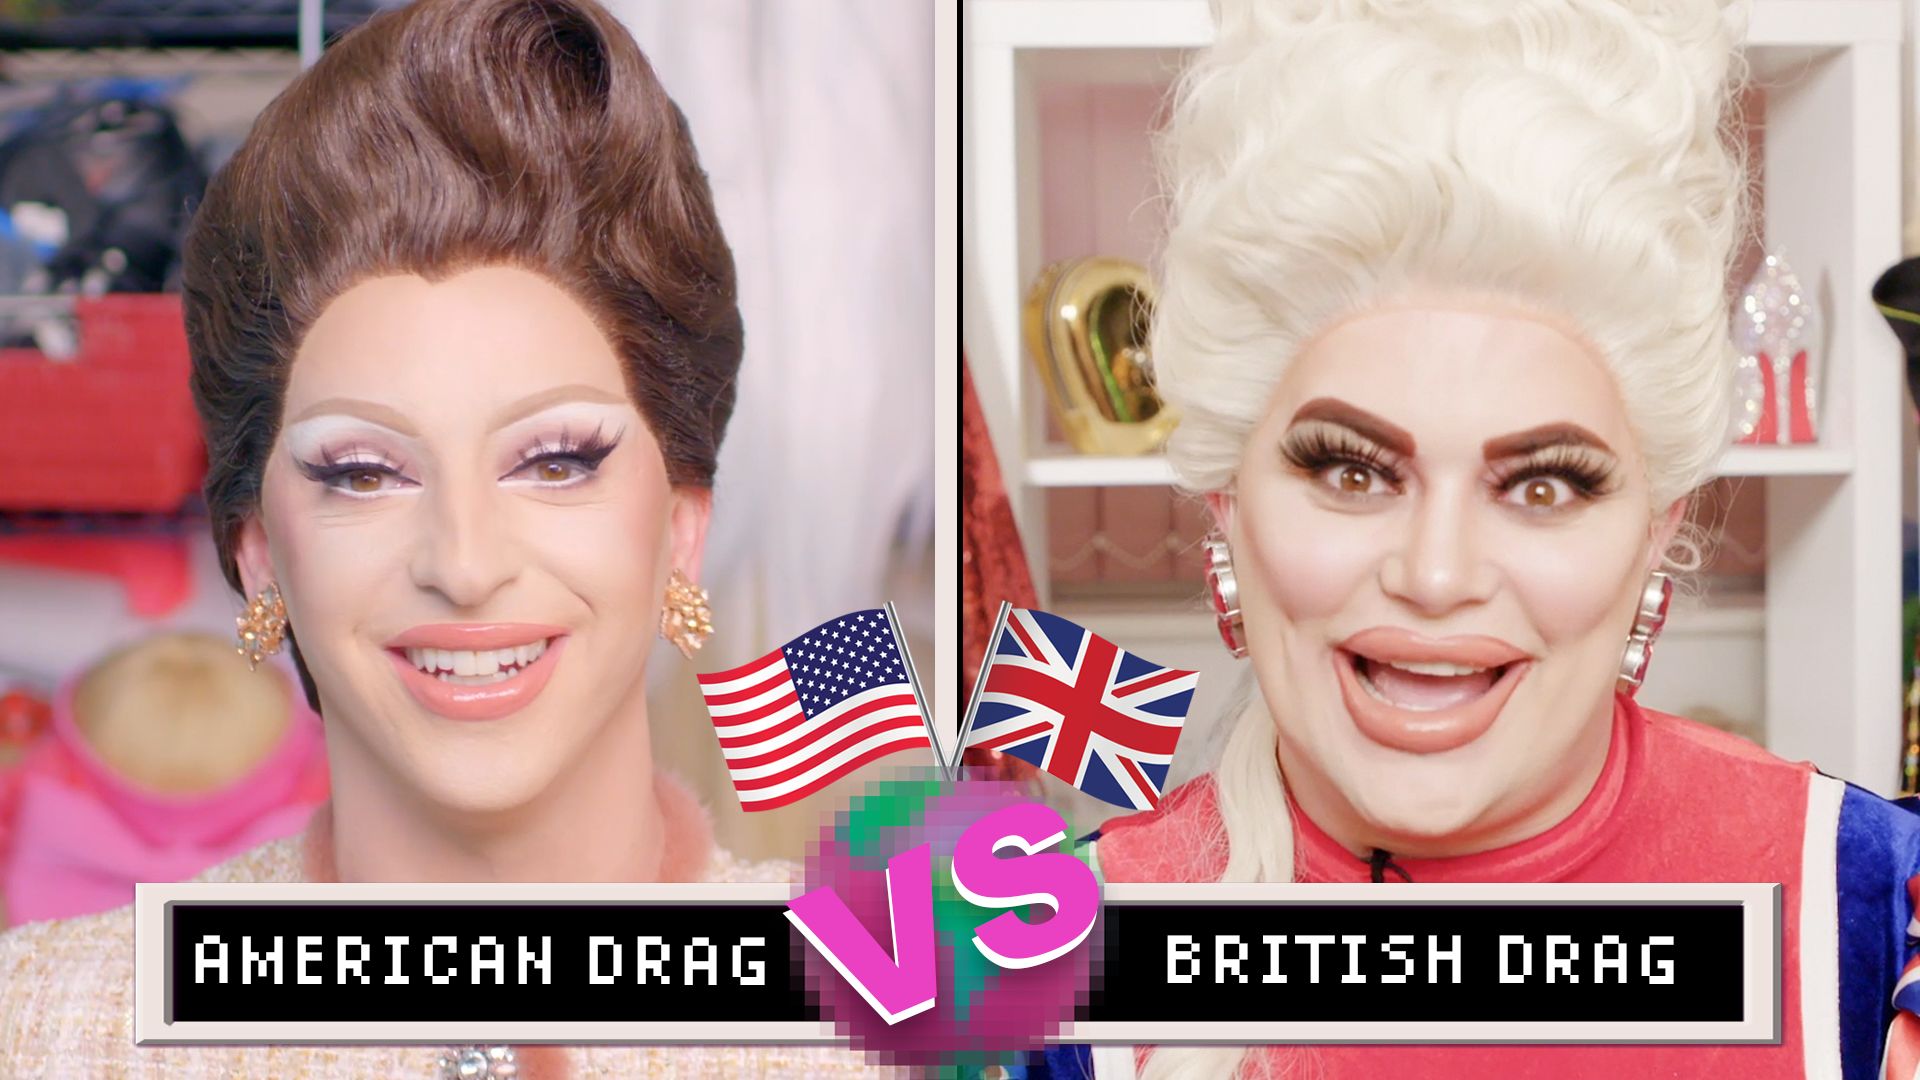 Lazy Town Porn Small Pussy - Watch Drag Queens Miz Cracker & Baga Chipz Compare American & British Drag  | The World's Our Stage | Them